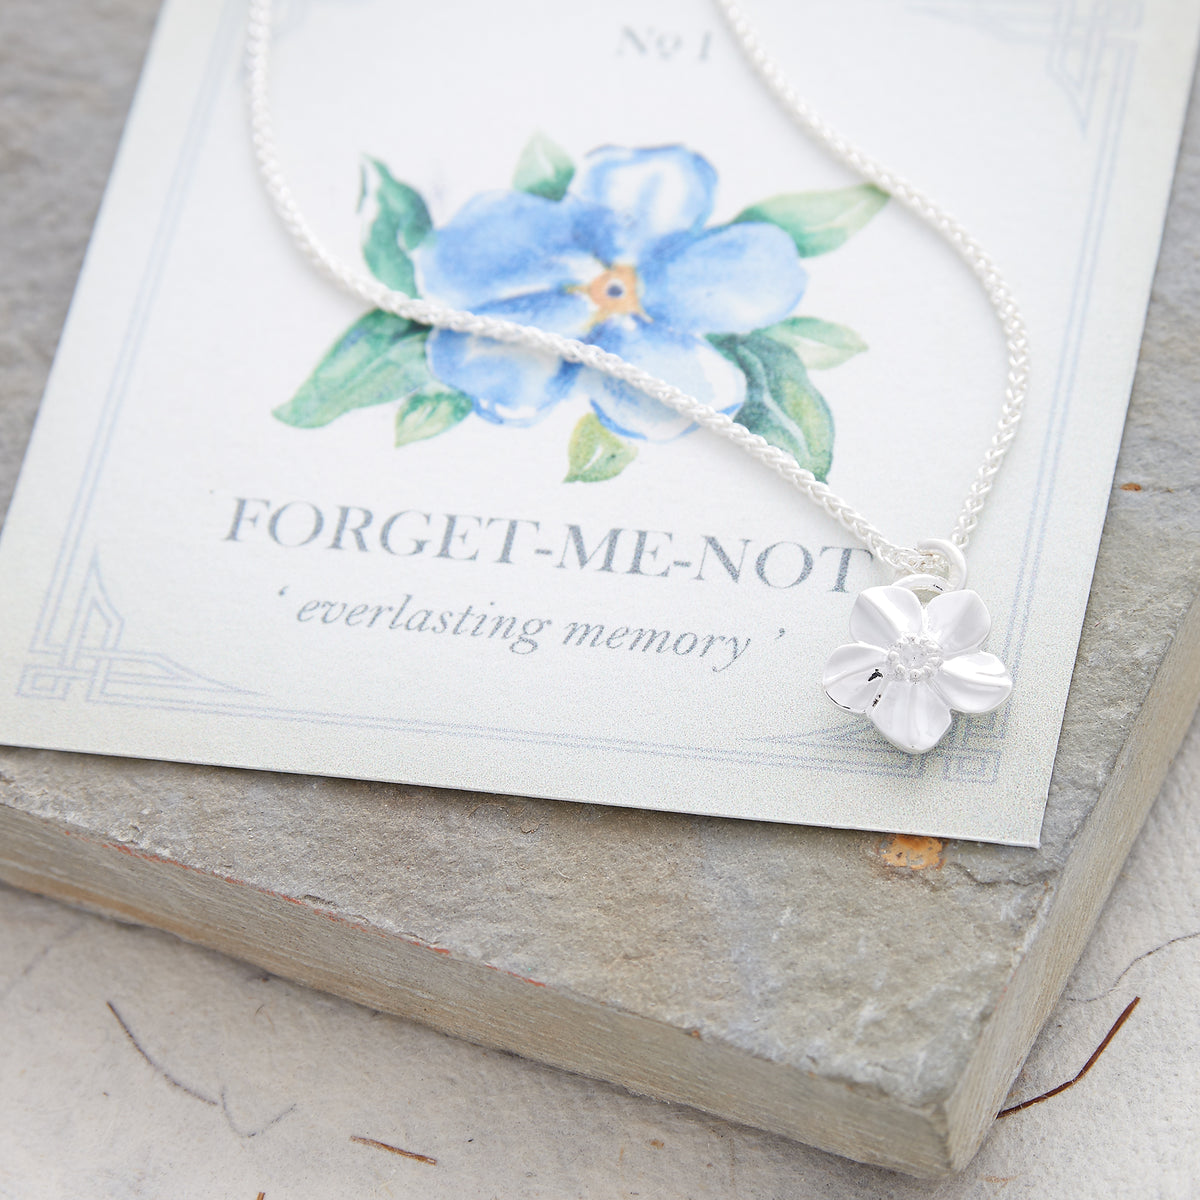 Silver forget-me-not flower necklace with heart on the back memorial gift slow fashion Chelsea Flower Show